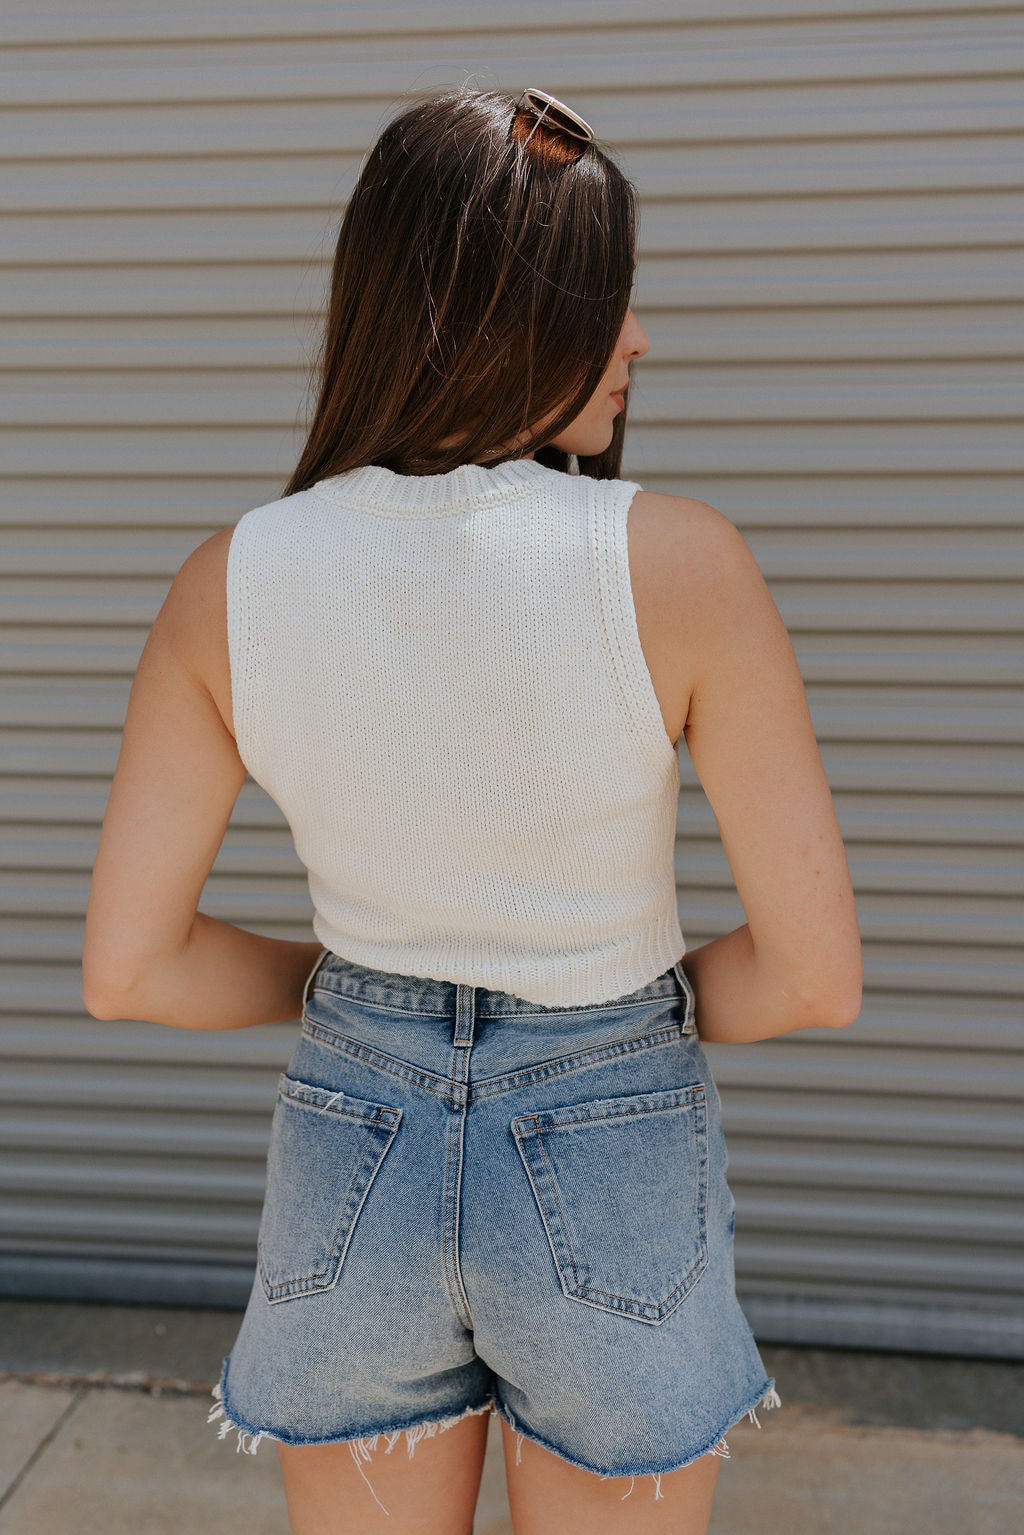 back view of female model wearing the Love America Cream Knit Tank which features Cream Knit Fabric, Round Neckline, Sleeveless and Red Stitch Heart, Says America in blue stitch writing